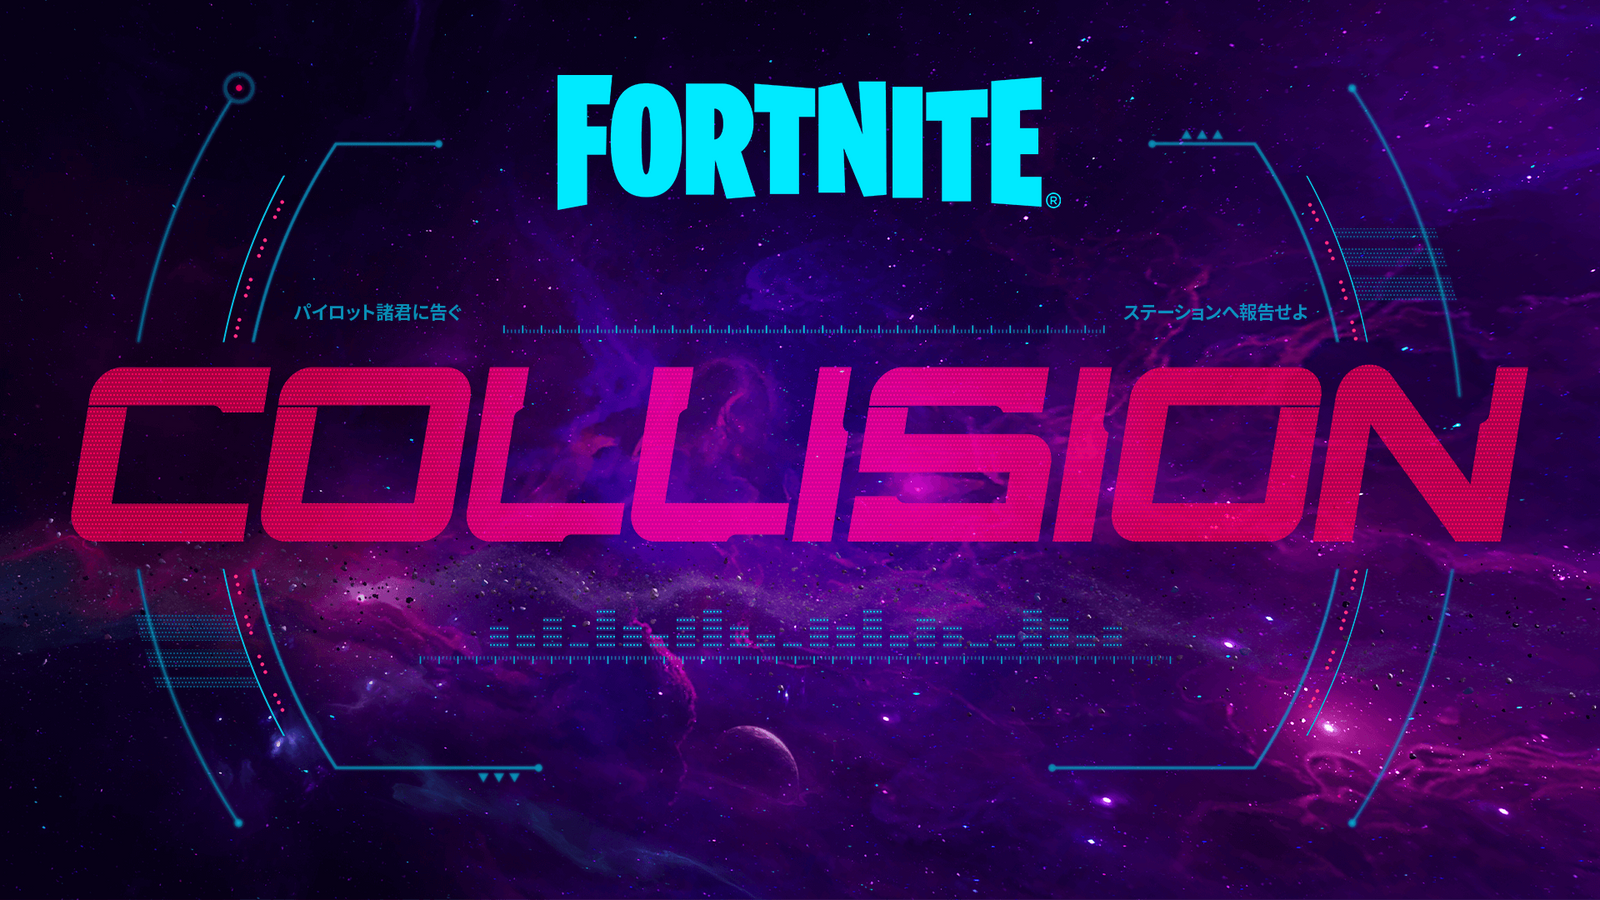 A promotional screenshot for Fortnite's end-of-season event called Collision set to take place right before Fortnite Season 3